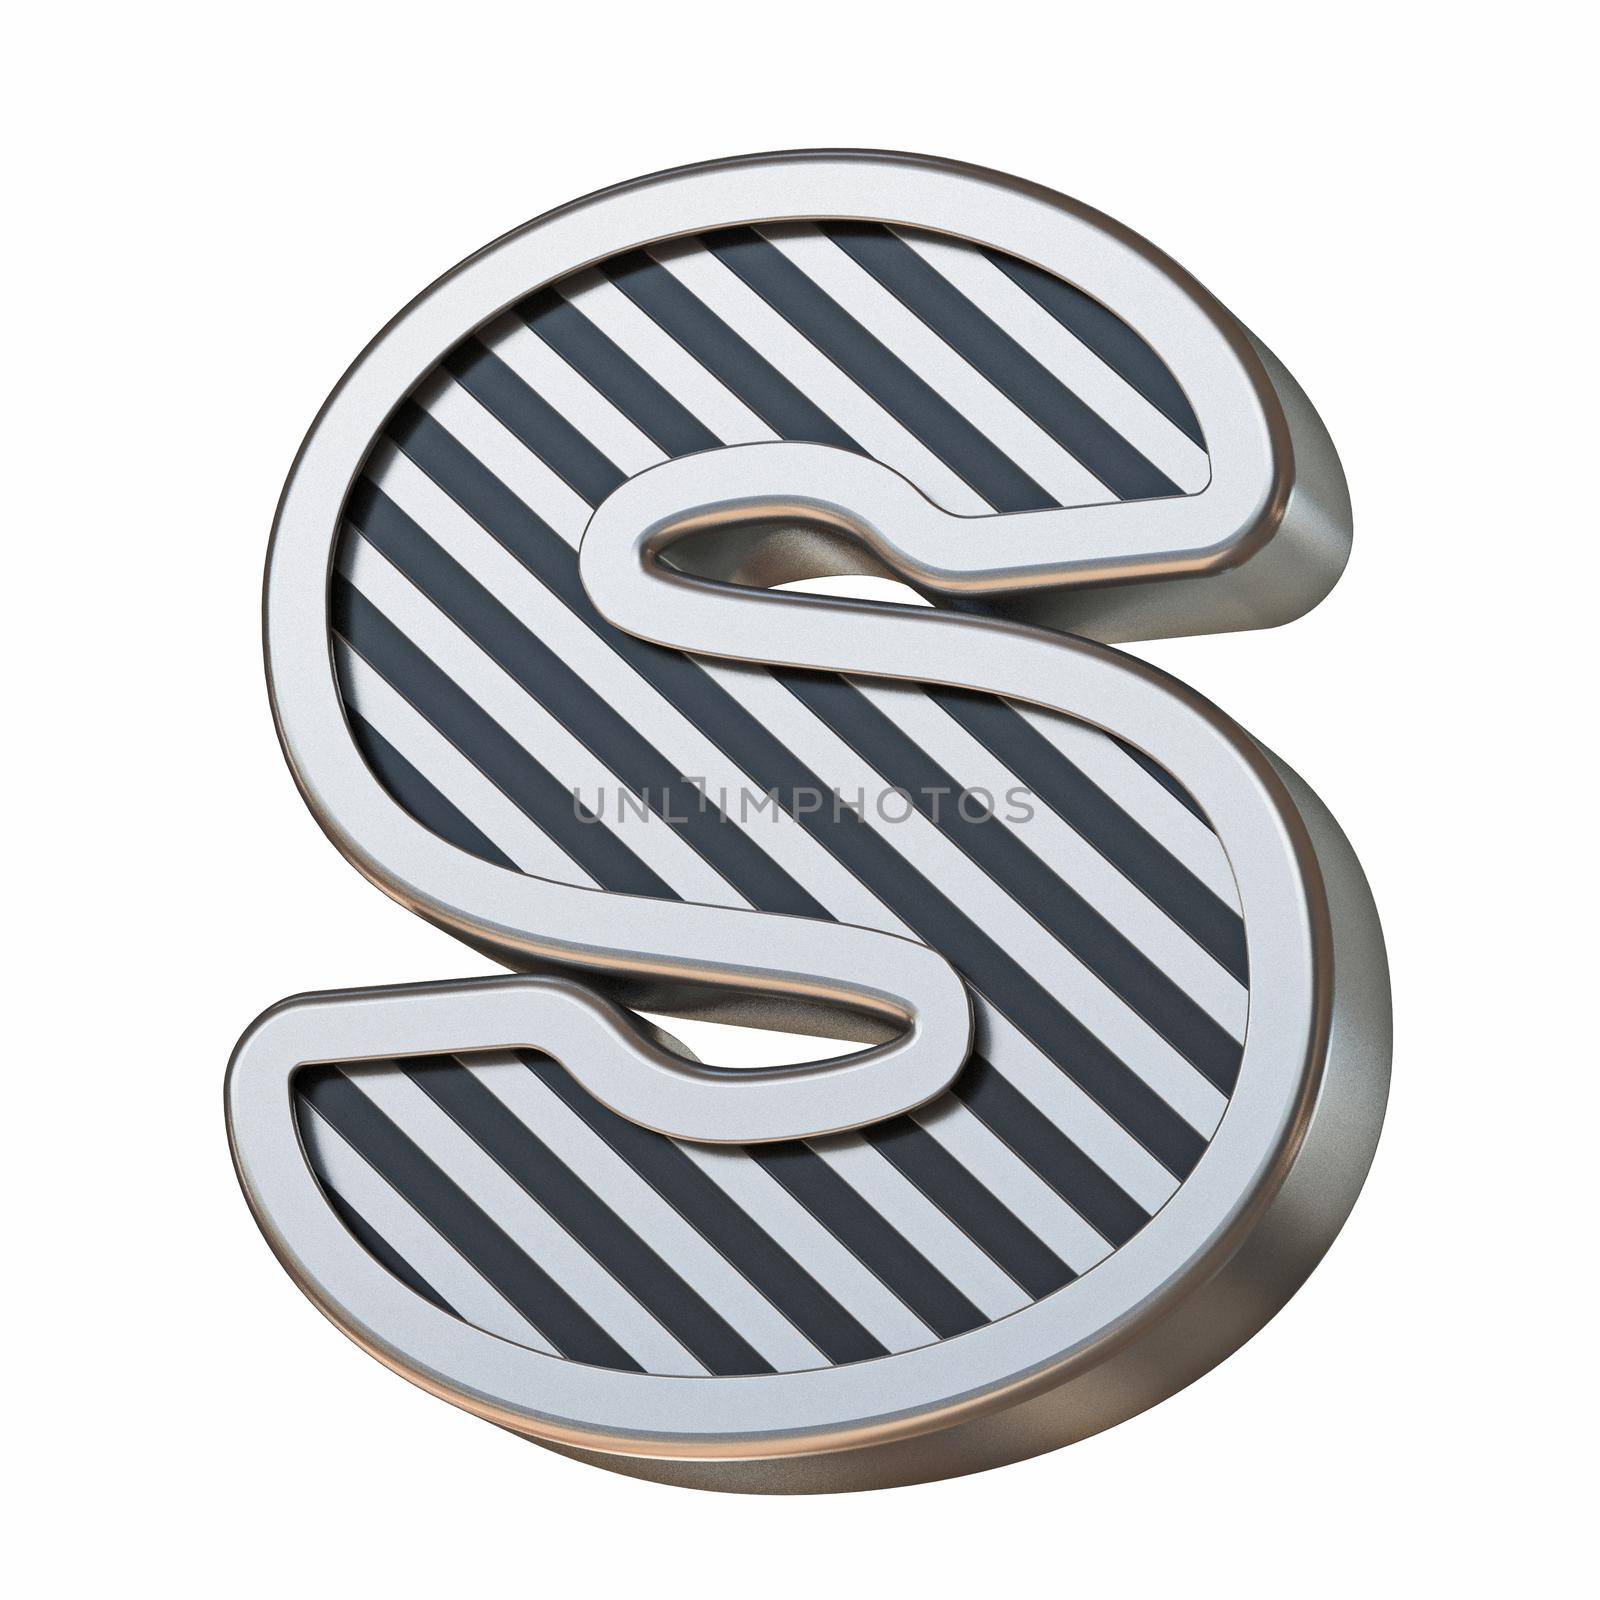 Stainless steel and black stripes font Letter S 3D by djmilic